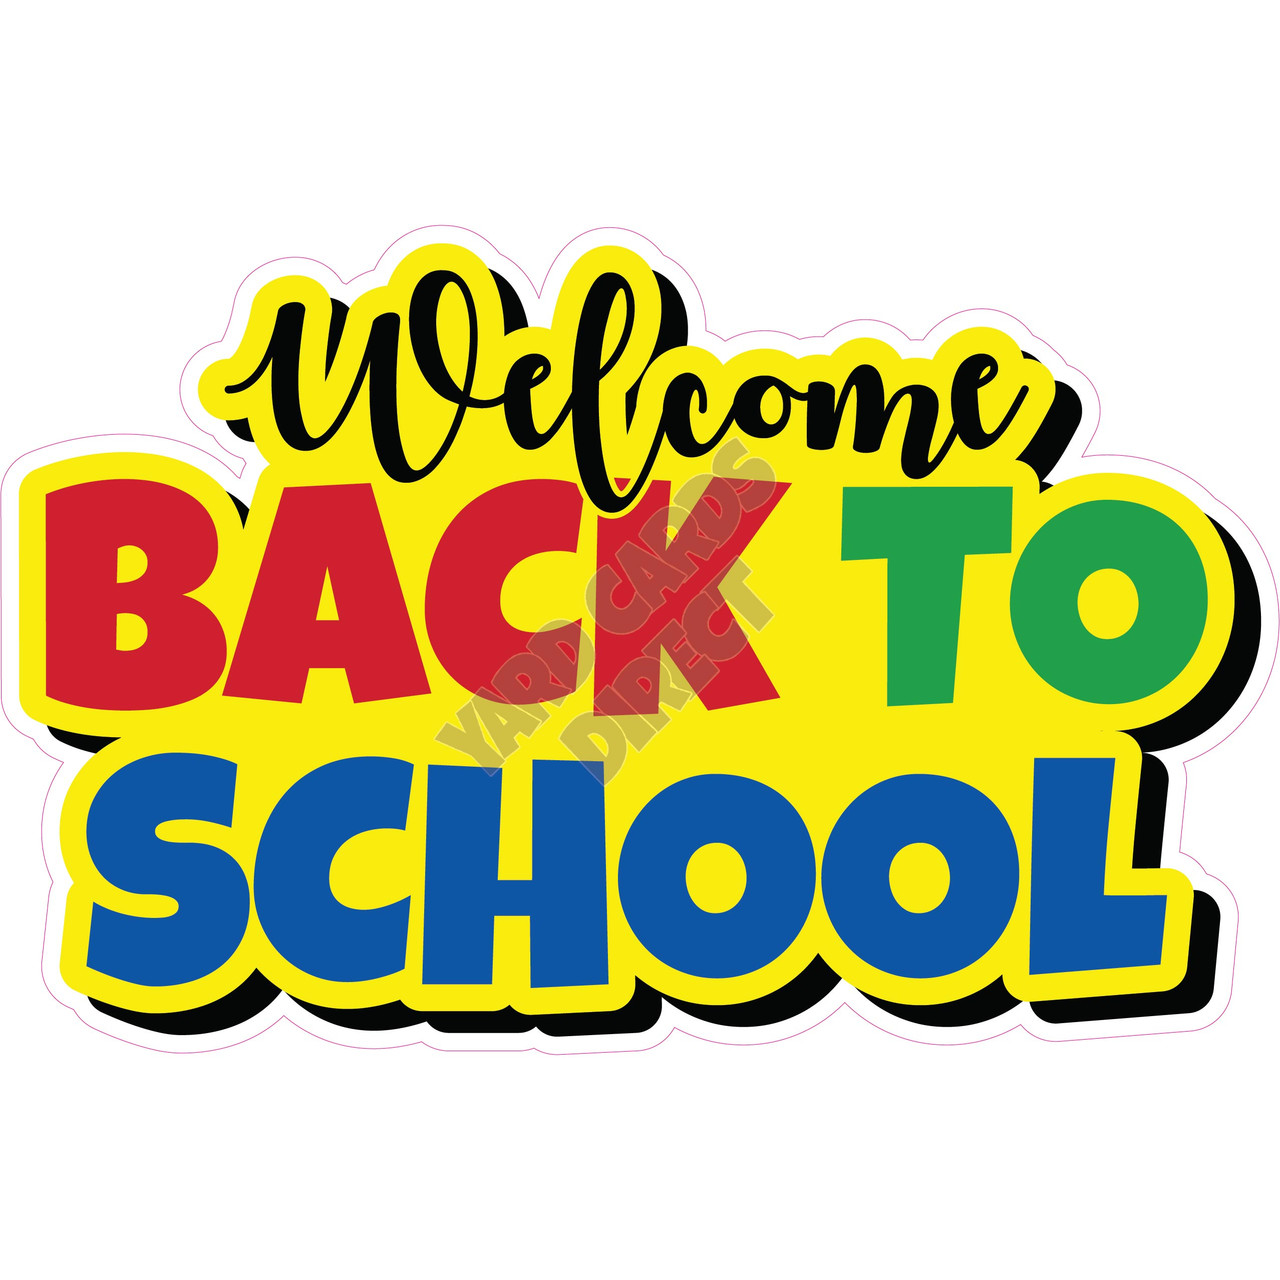 Statement - Welcome Back To School - Style A - Yard Card - Yard Cards ...